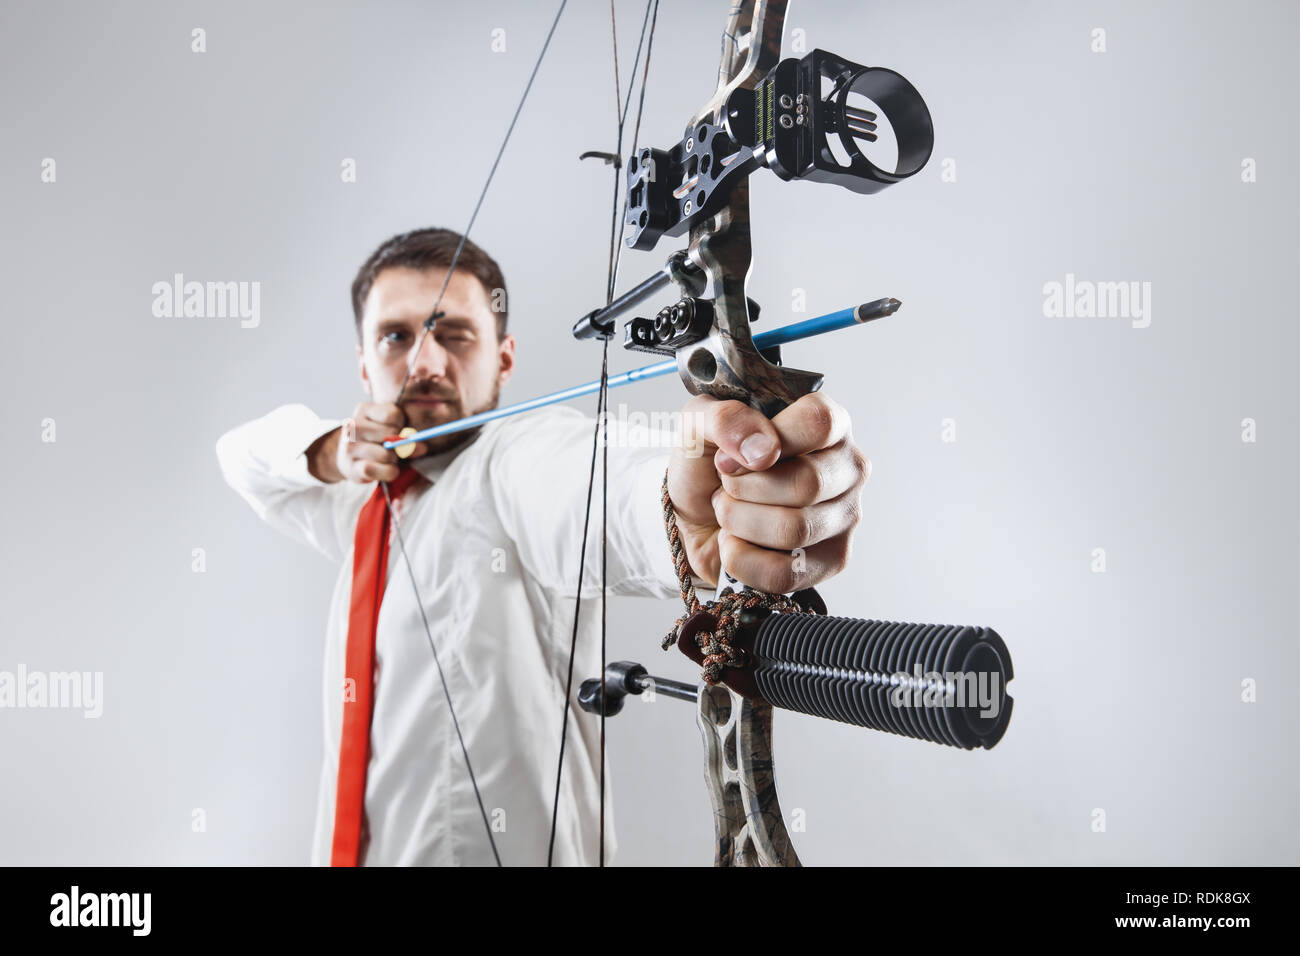 Businessman aiming at target with bow and arrow, isolated on gray studio background. The business, goal, challenge, competition, achievement concept Stock Photo